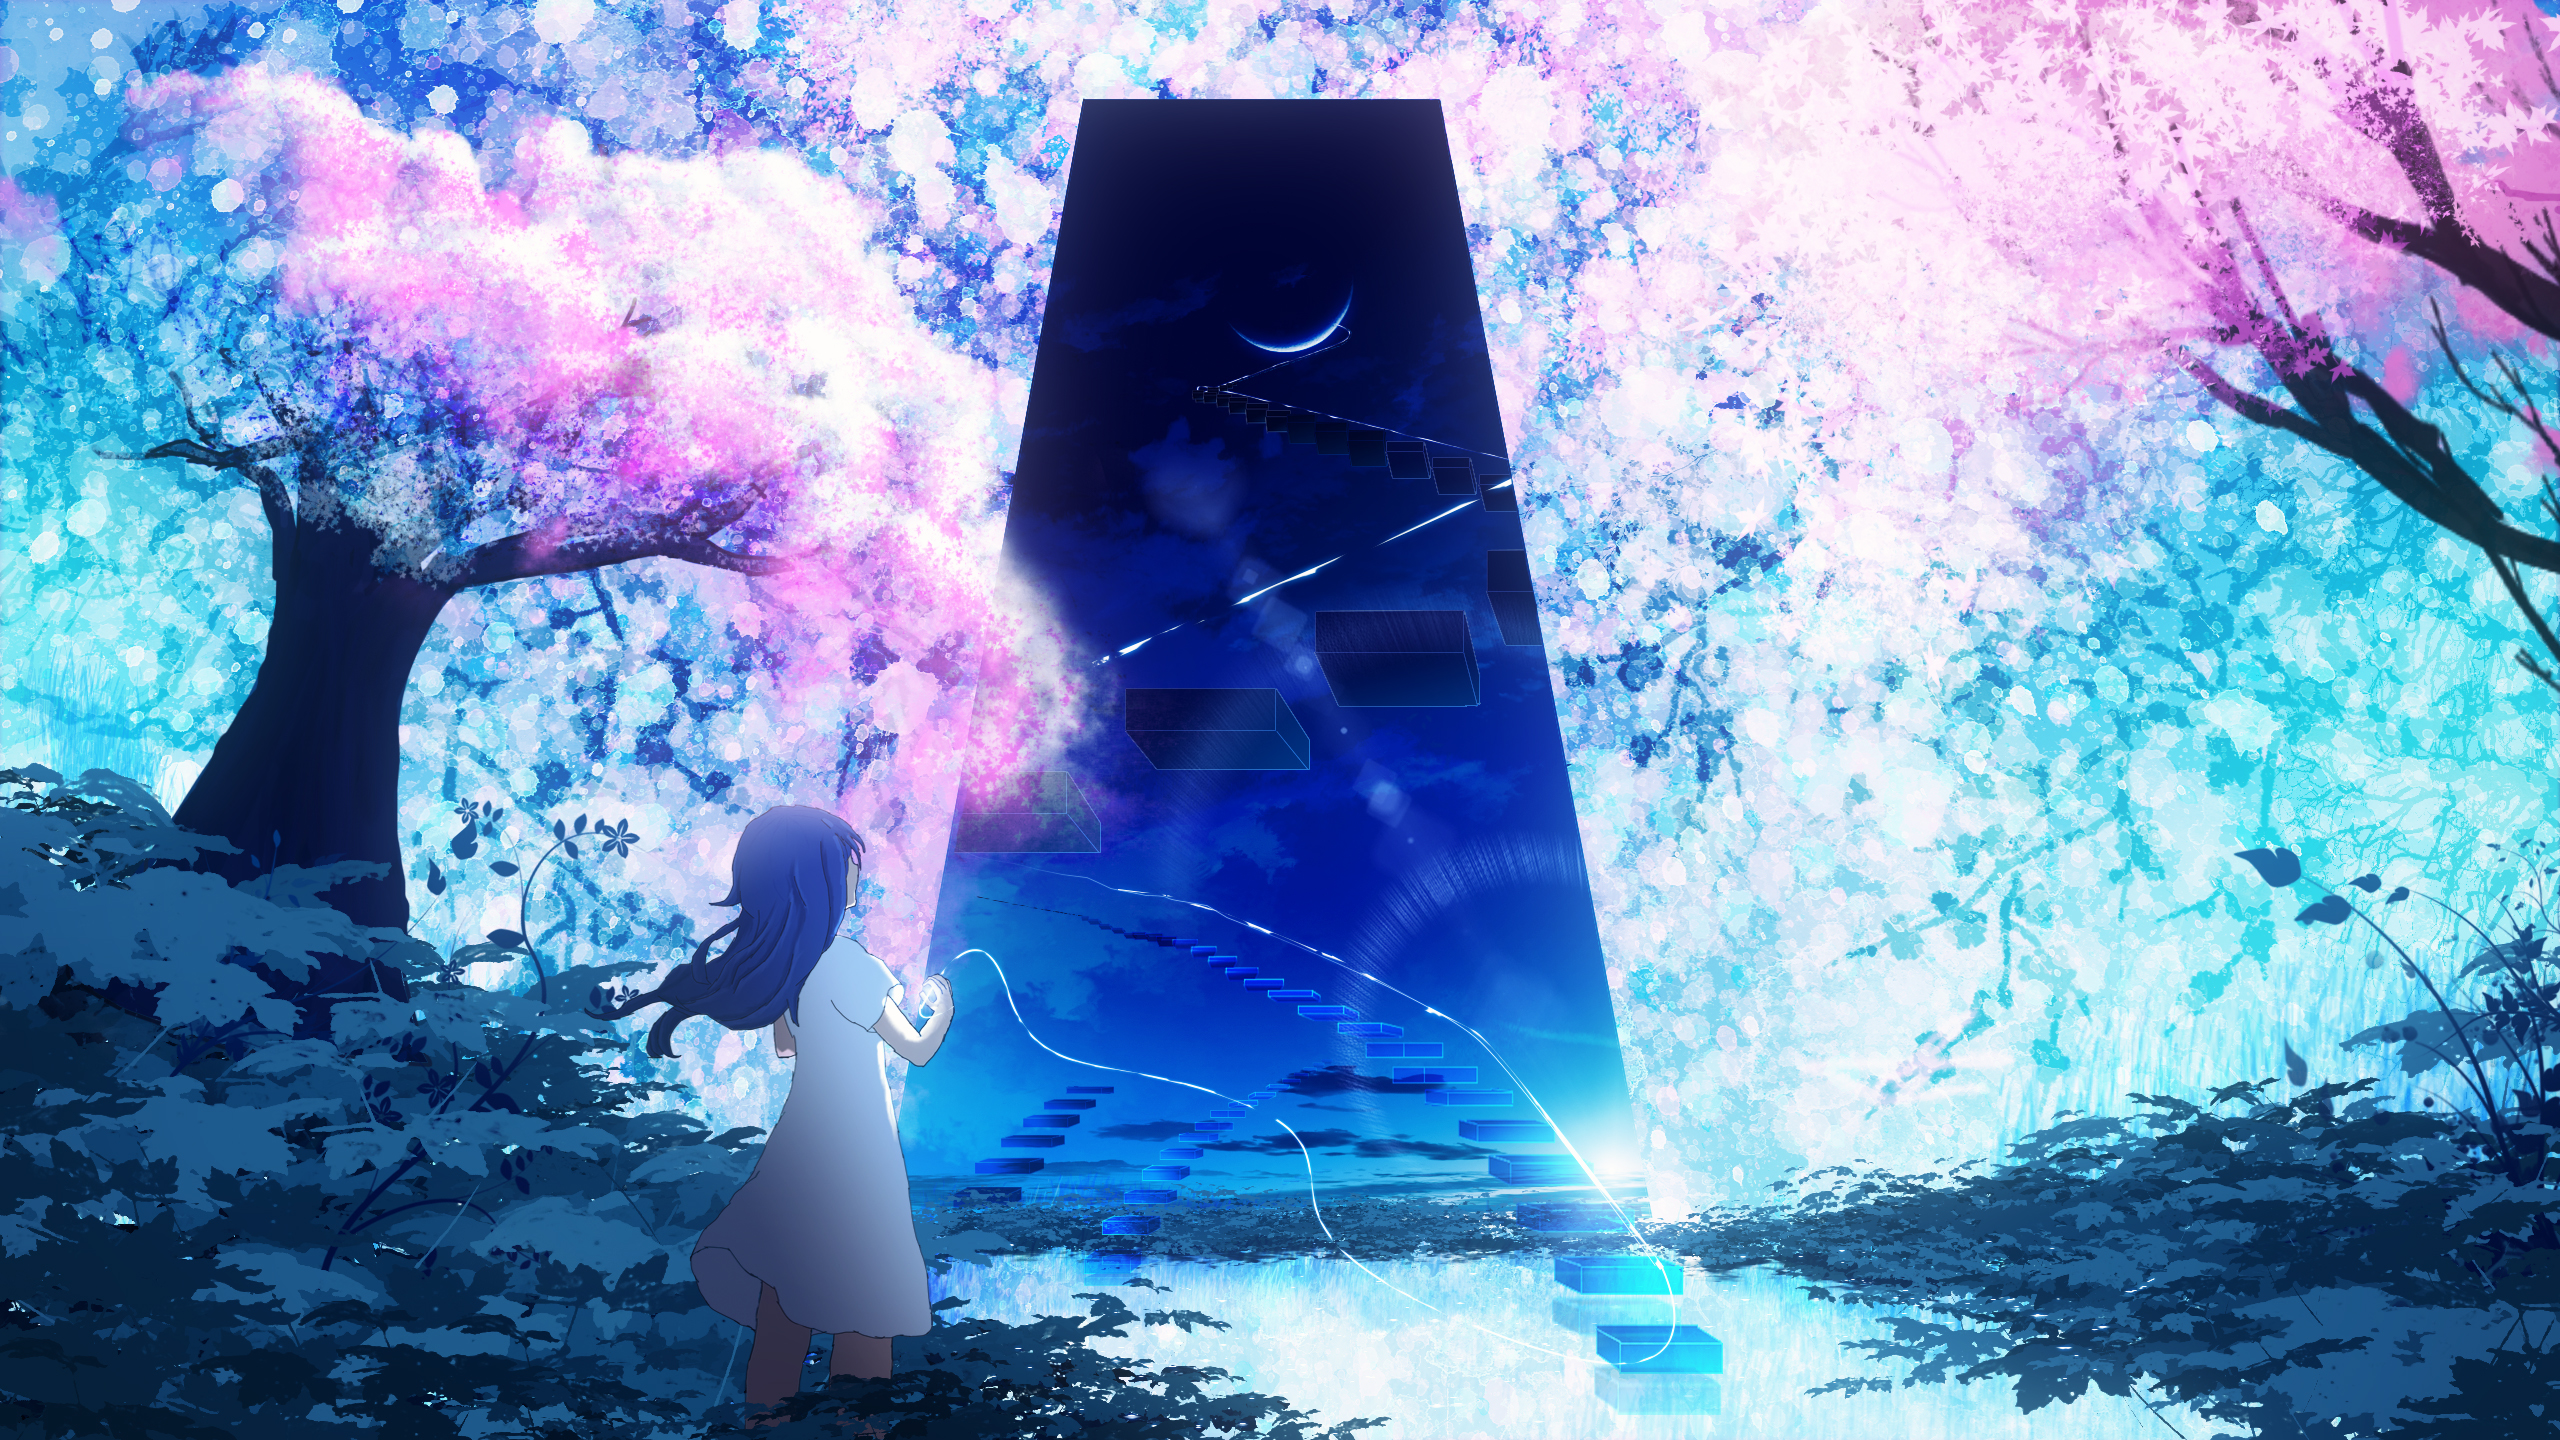 Free Cherry Blossoms Lovers Background Images Couple Under The Cherry  Blossom Background Illustration H5 Photo Background PNG and Vectors  Anime  scenery wallpaper Anime scenery Anime cherry blossom